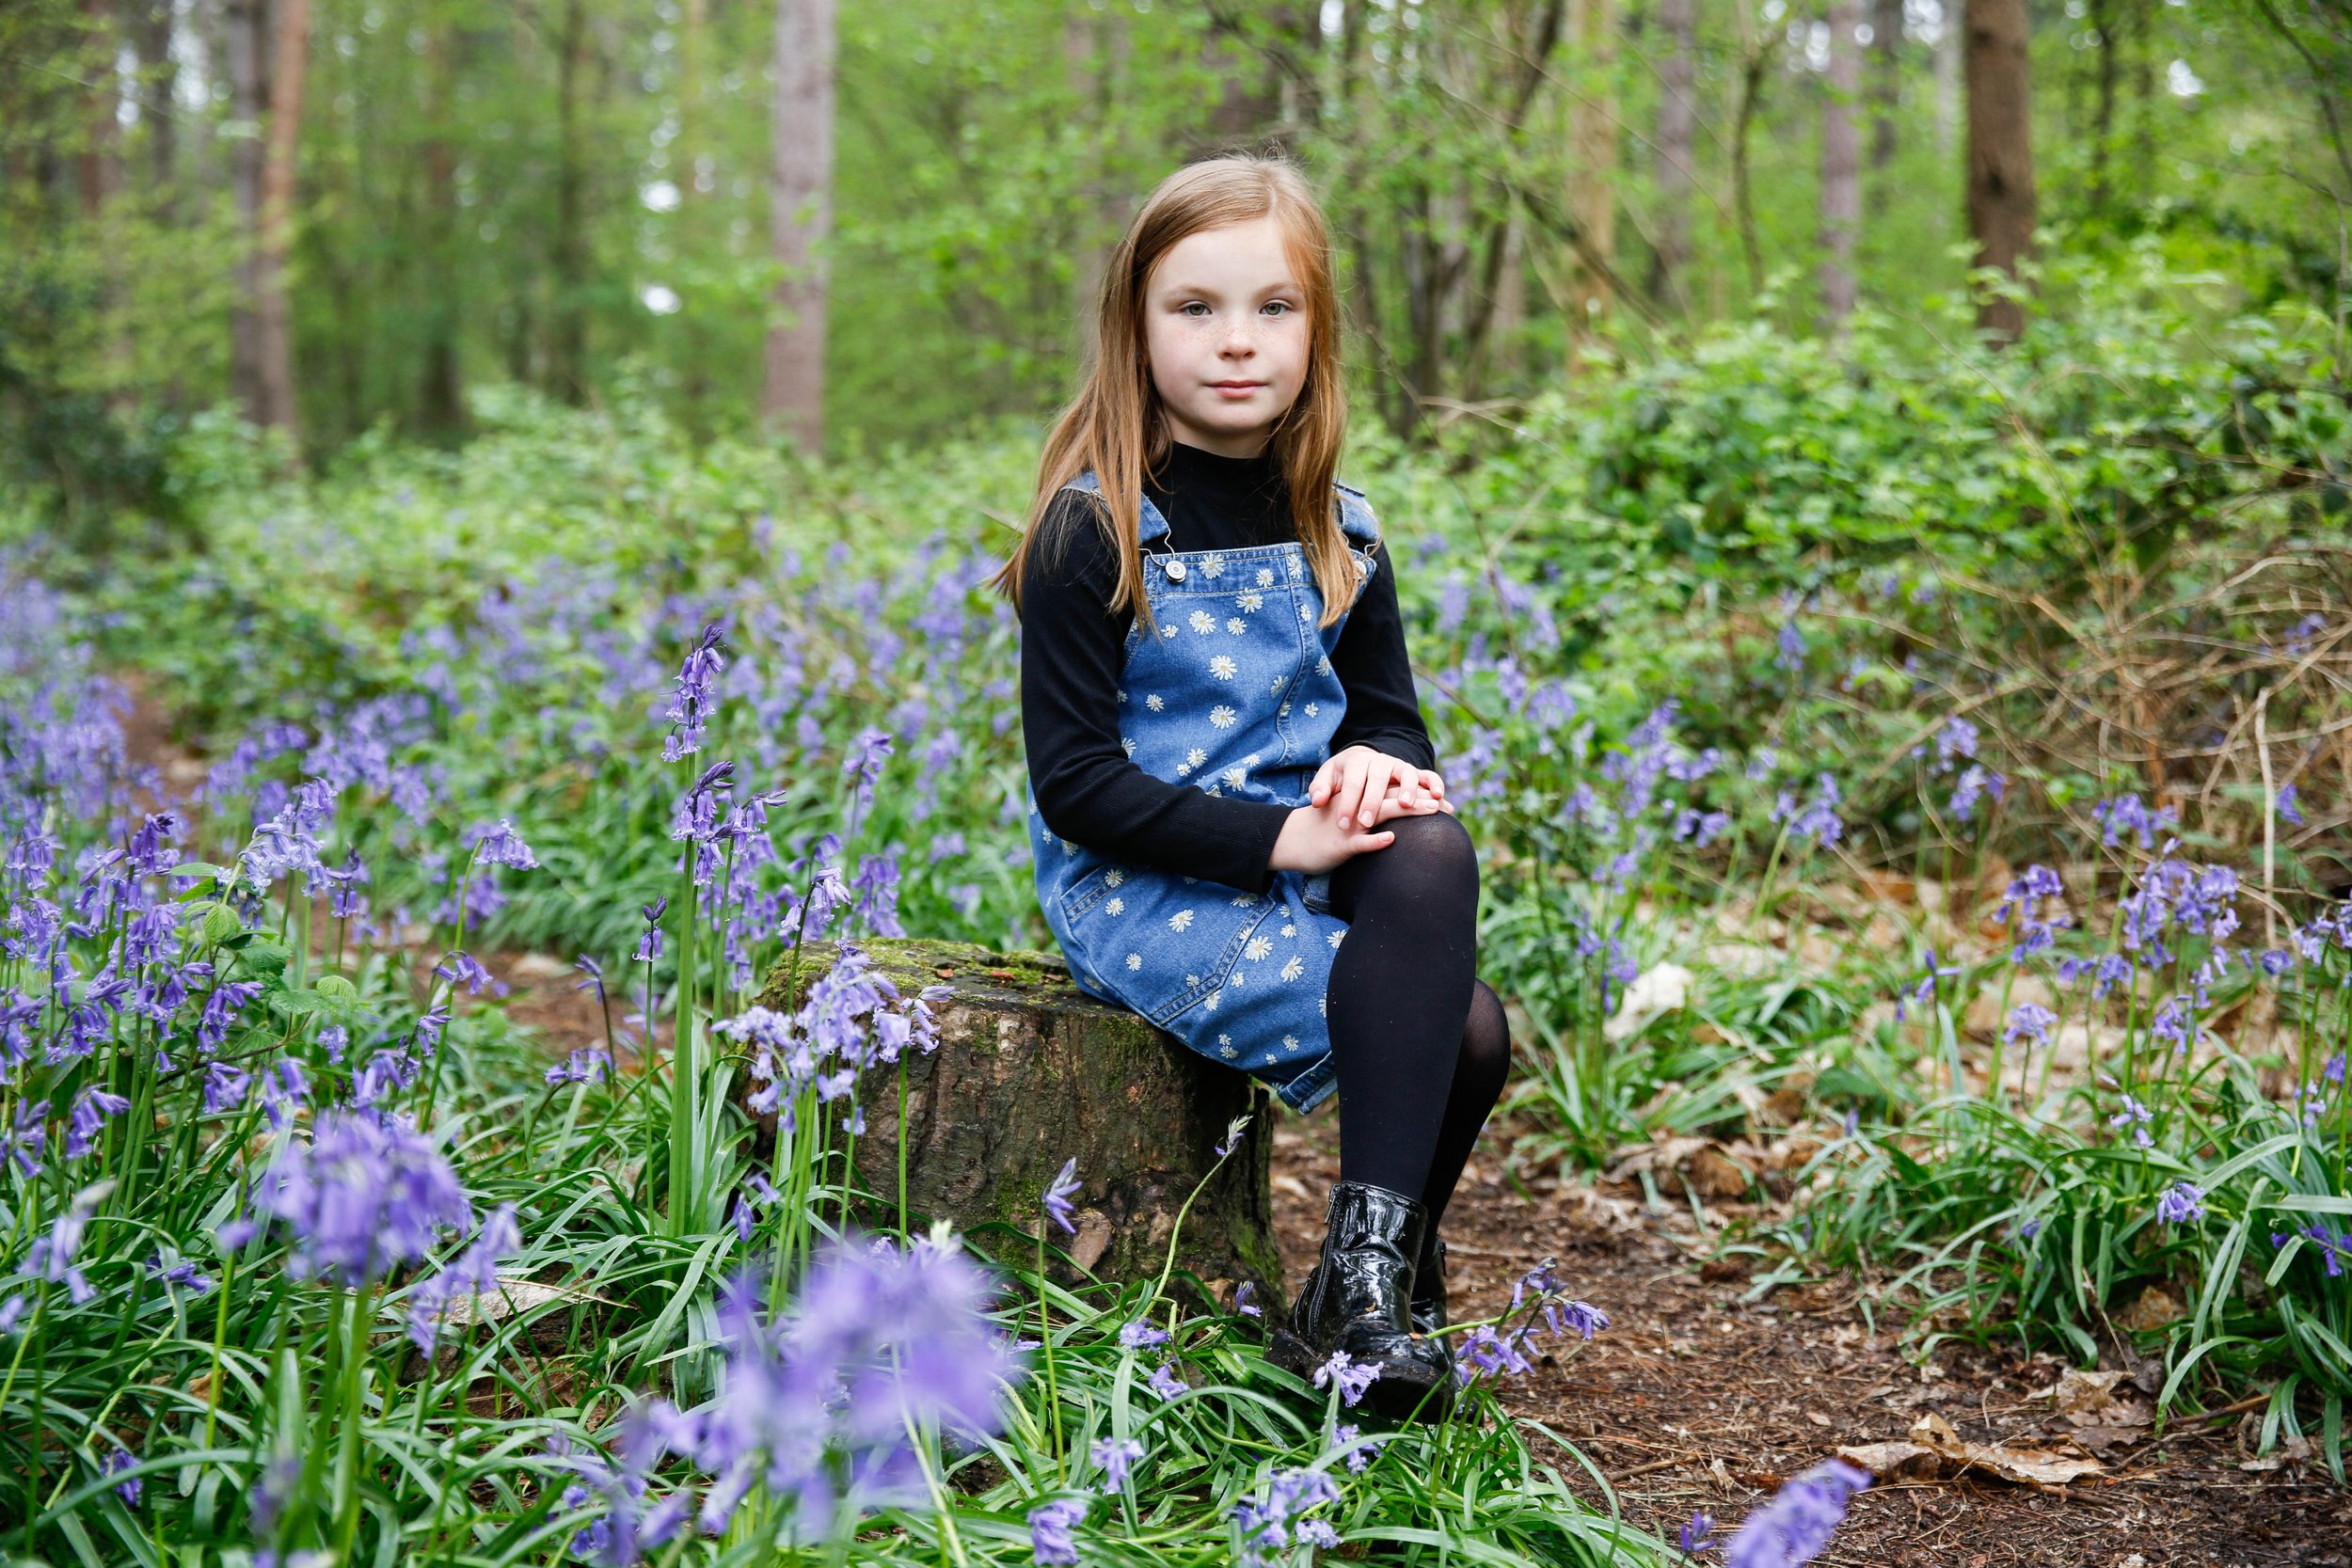 MUM AND DAUGHTER PHOTO SHOOT IN THE BLUEBELLS | BERKSHIRE PORTRAIT SHOOTS08 choice .JPG